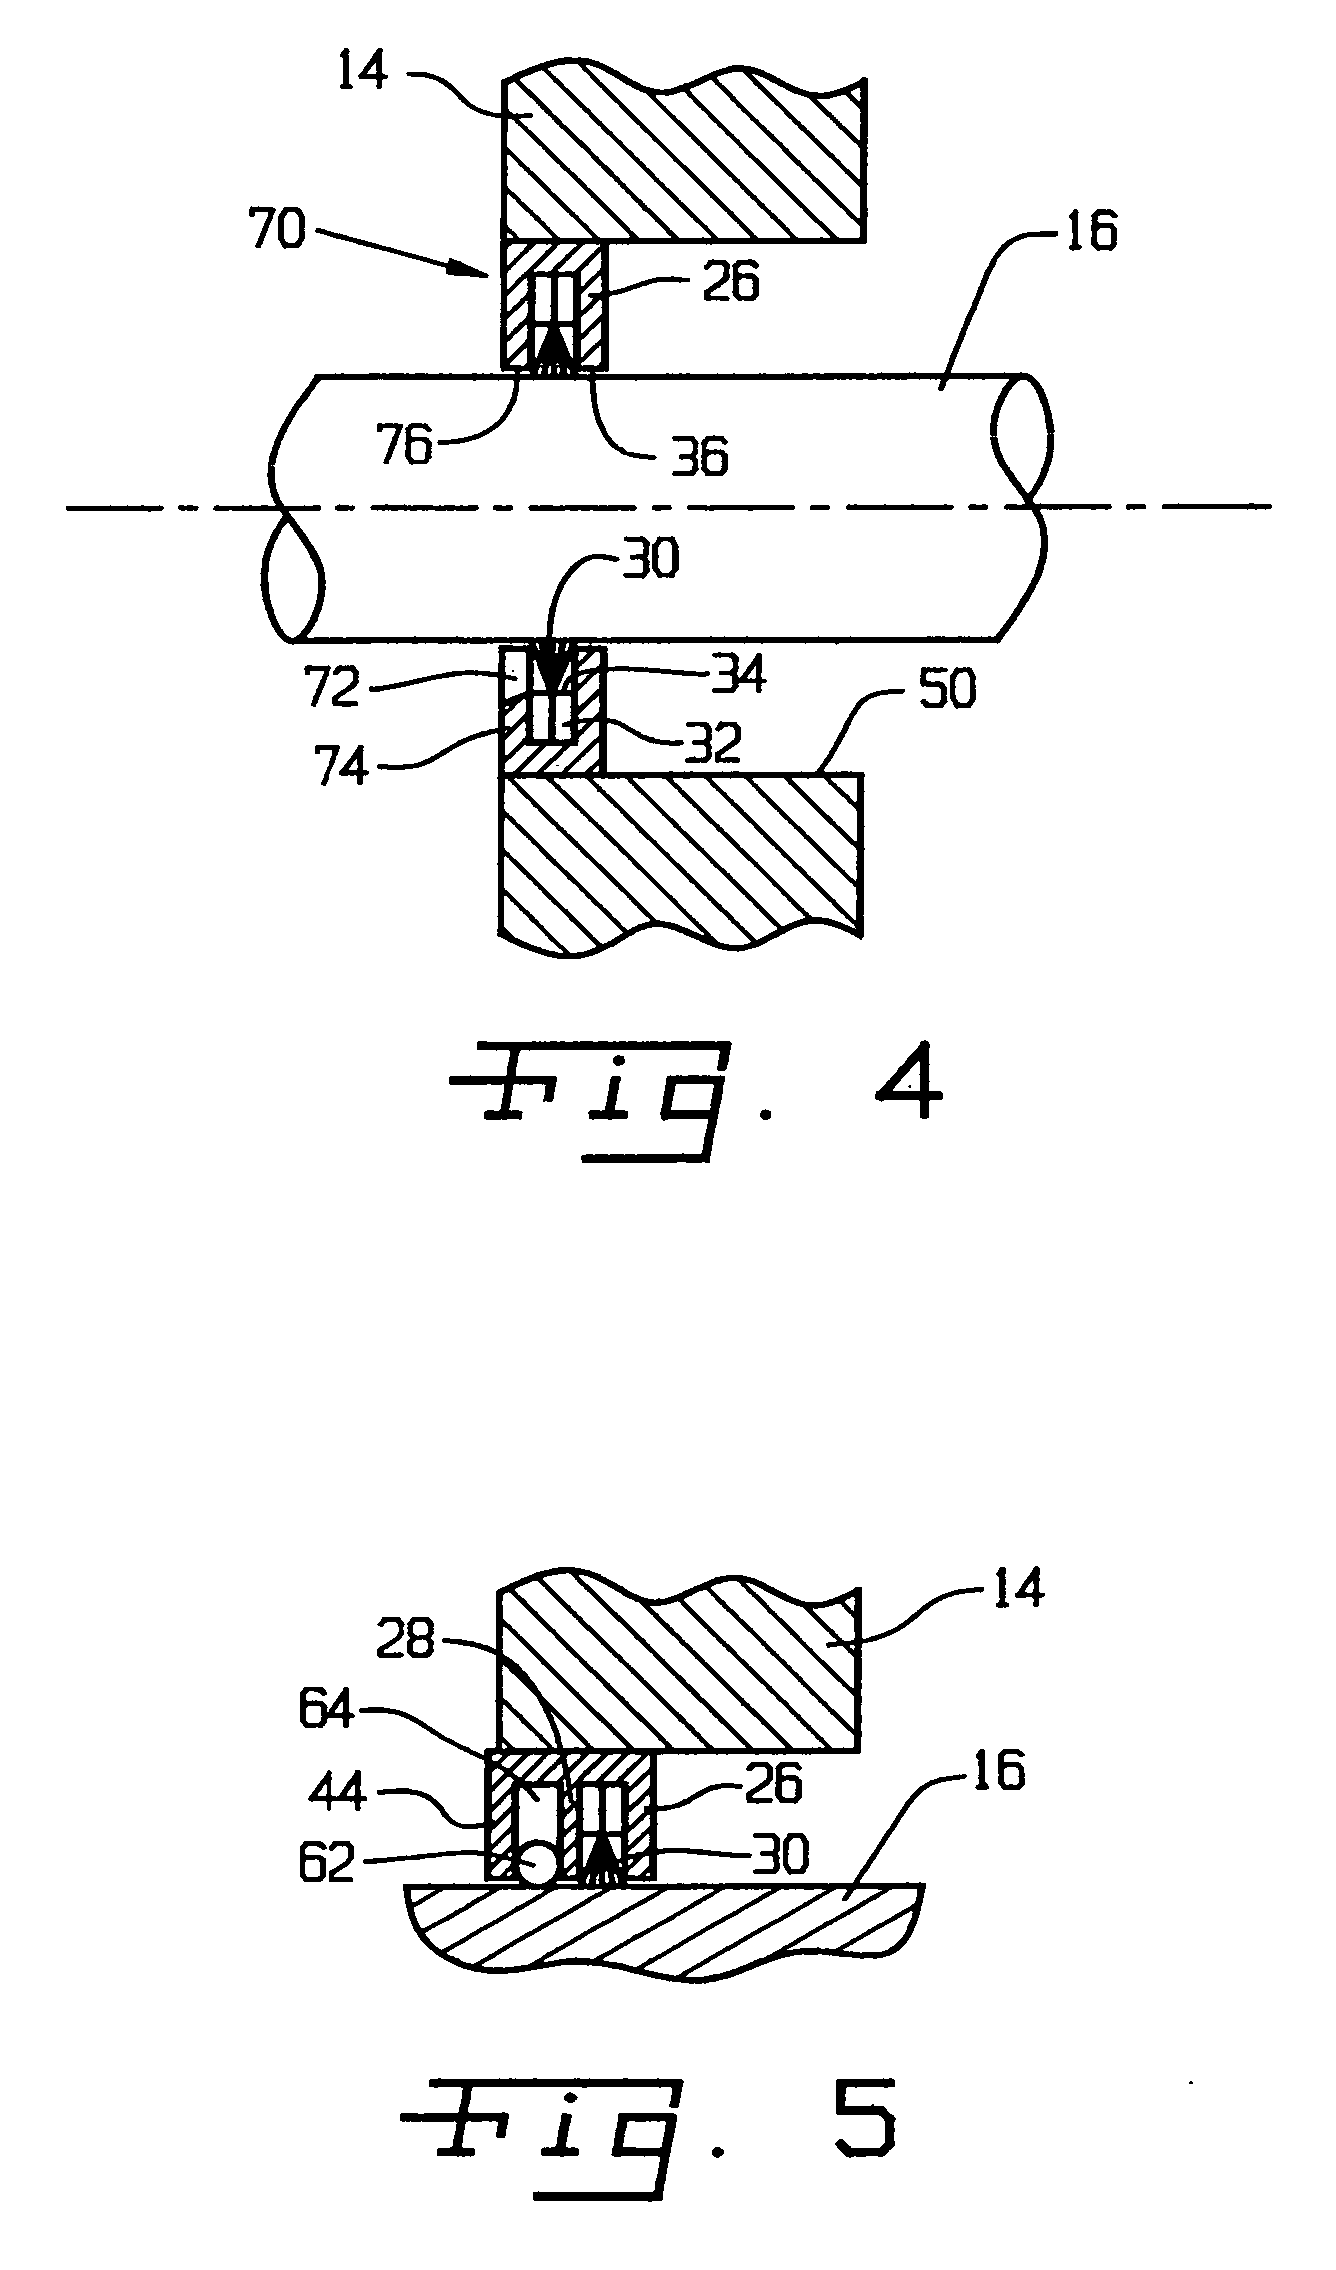 Shaft current control brush assembly with drainage